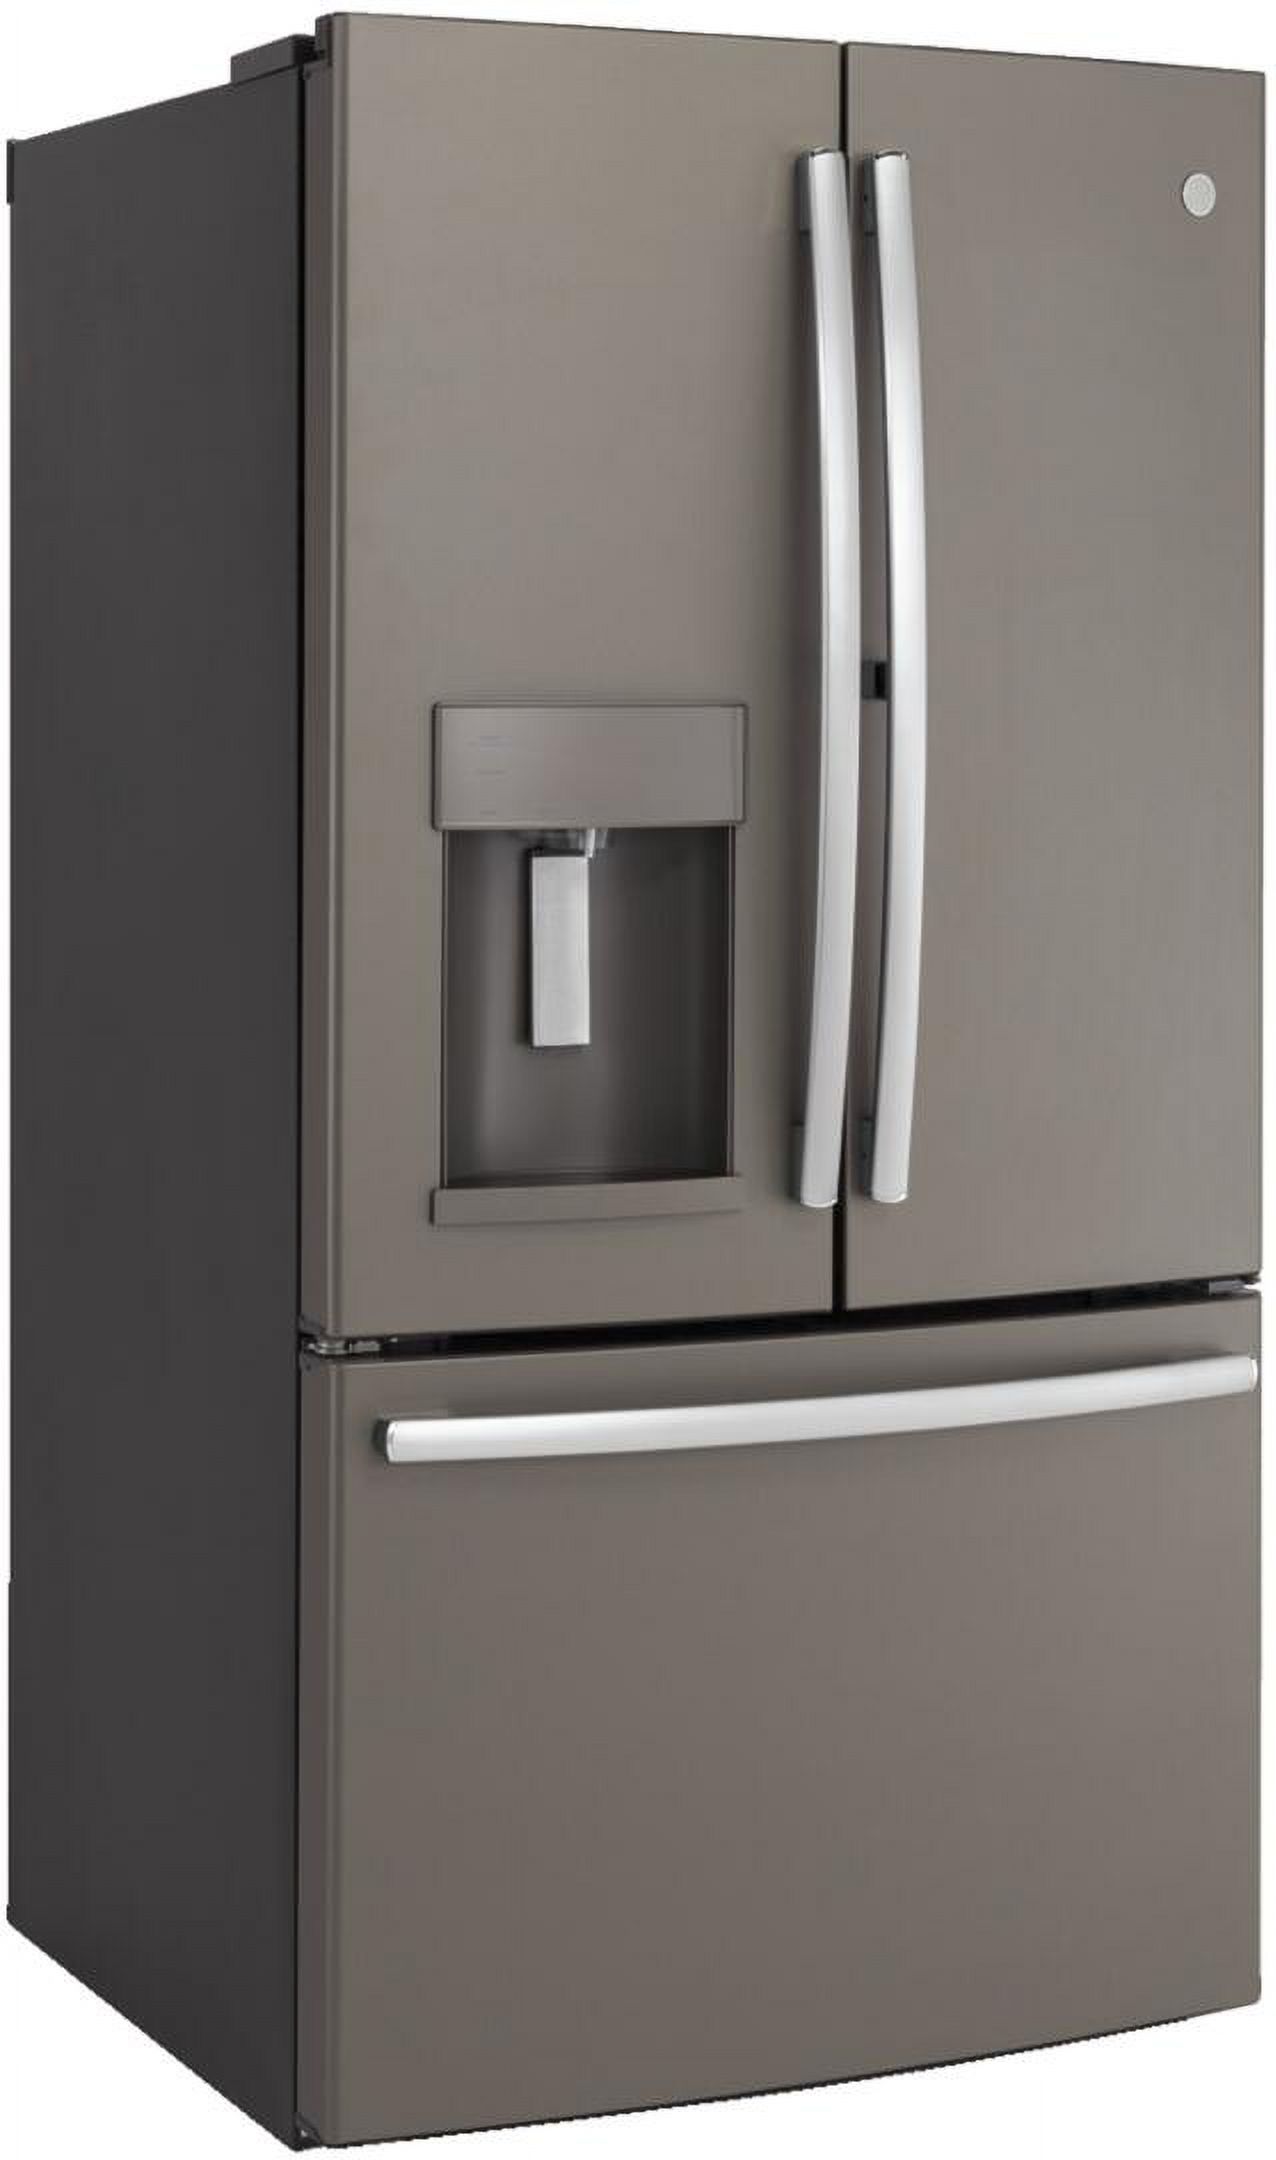 "GE GFD28GMLES 36 Inch French Door Refrigerator with 27.8 cu. ft. Total Capacity, 5 Glass Shelves, 9.2 cu. ft. Freezer Capacity, in Slate" - image 5 of 11